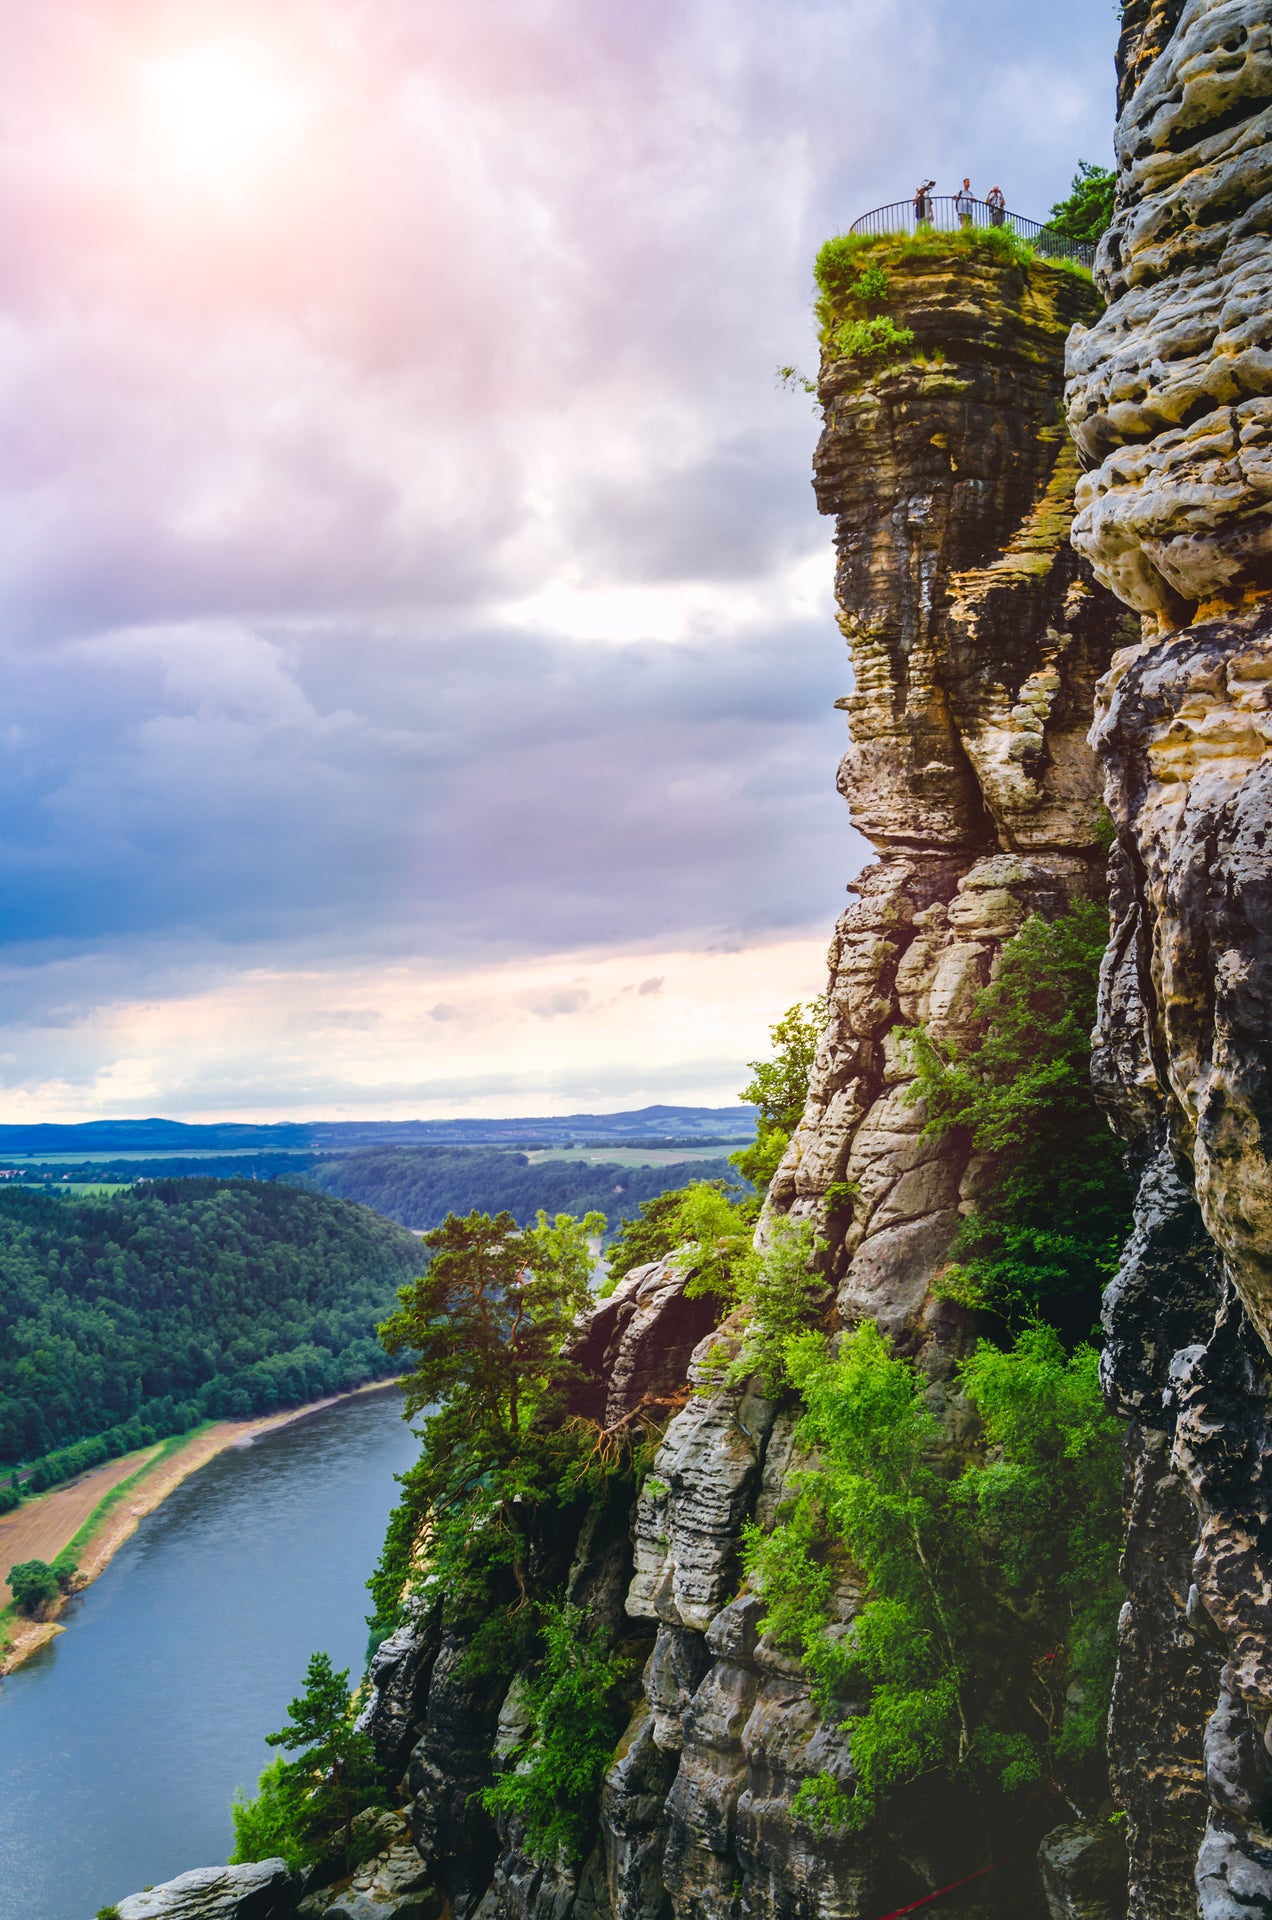 Viewpoint with some tourist on bastei rock formation in Saxon Switzerland National Park, Germany